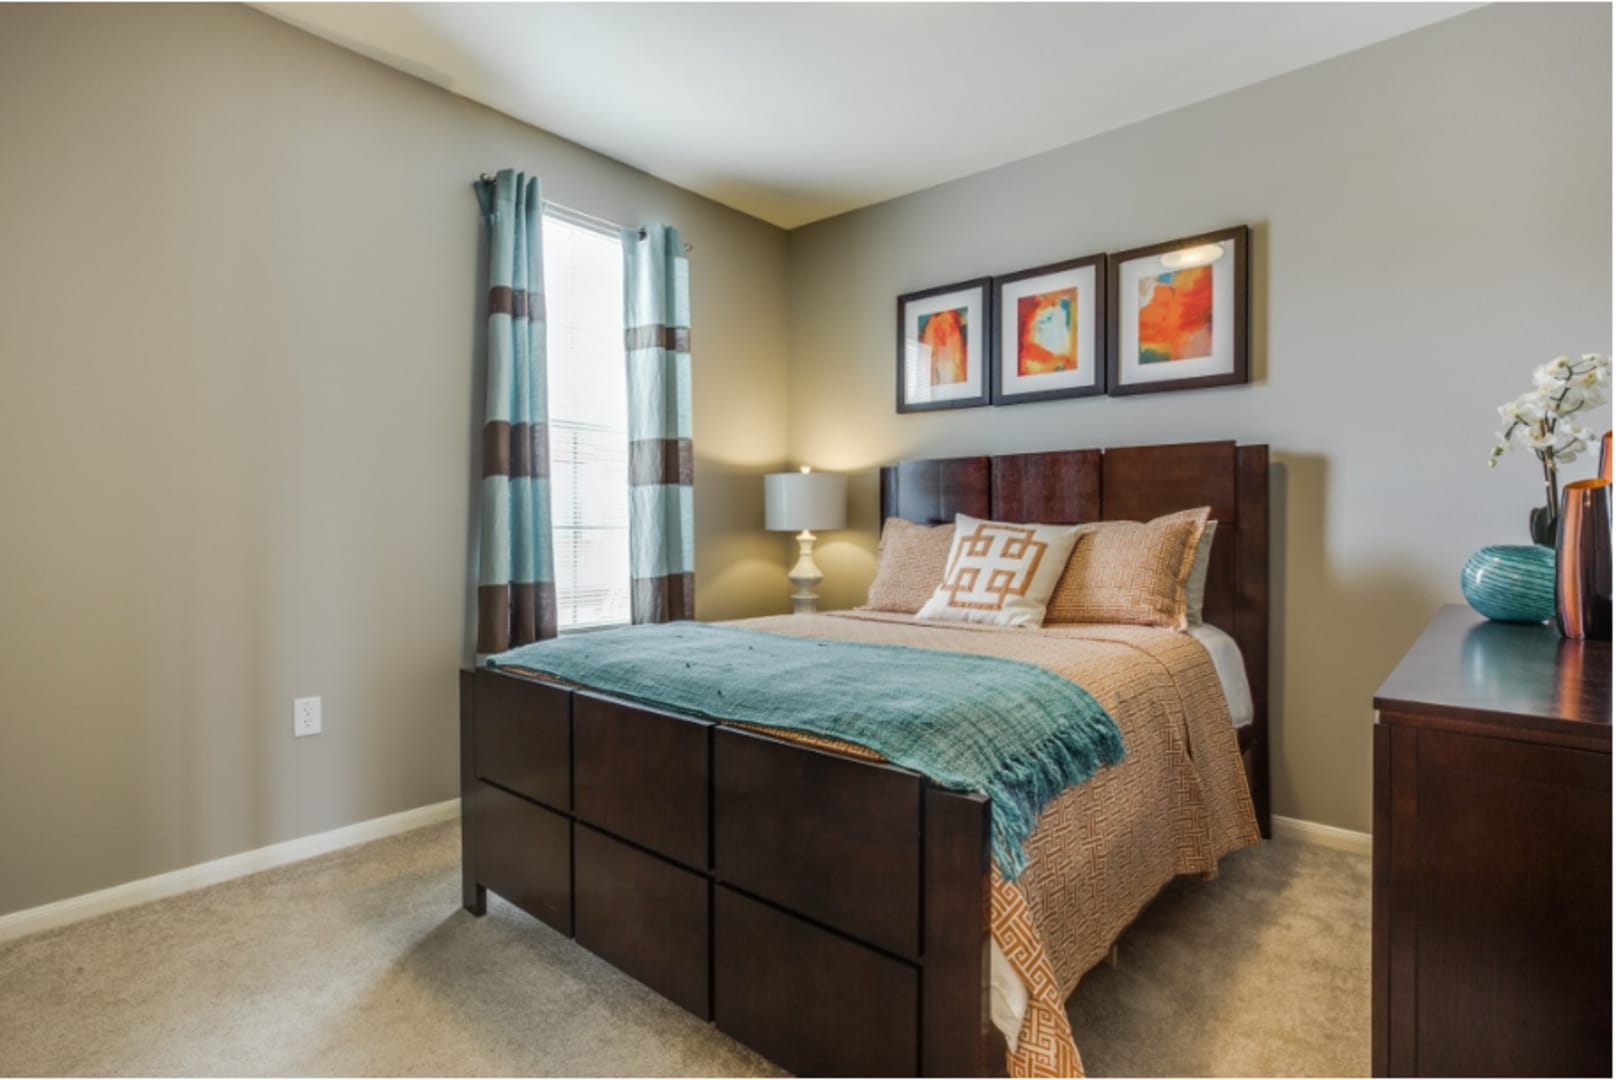 Model home's Bedroom at Parkside Towns in Richardson, Texas